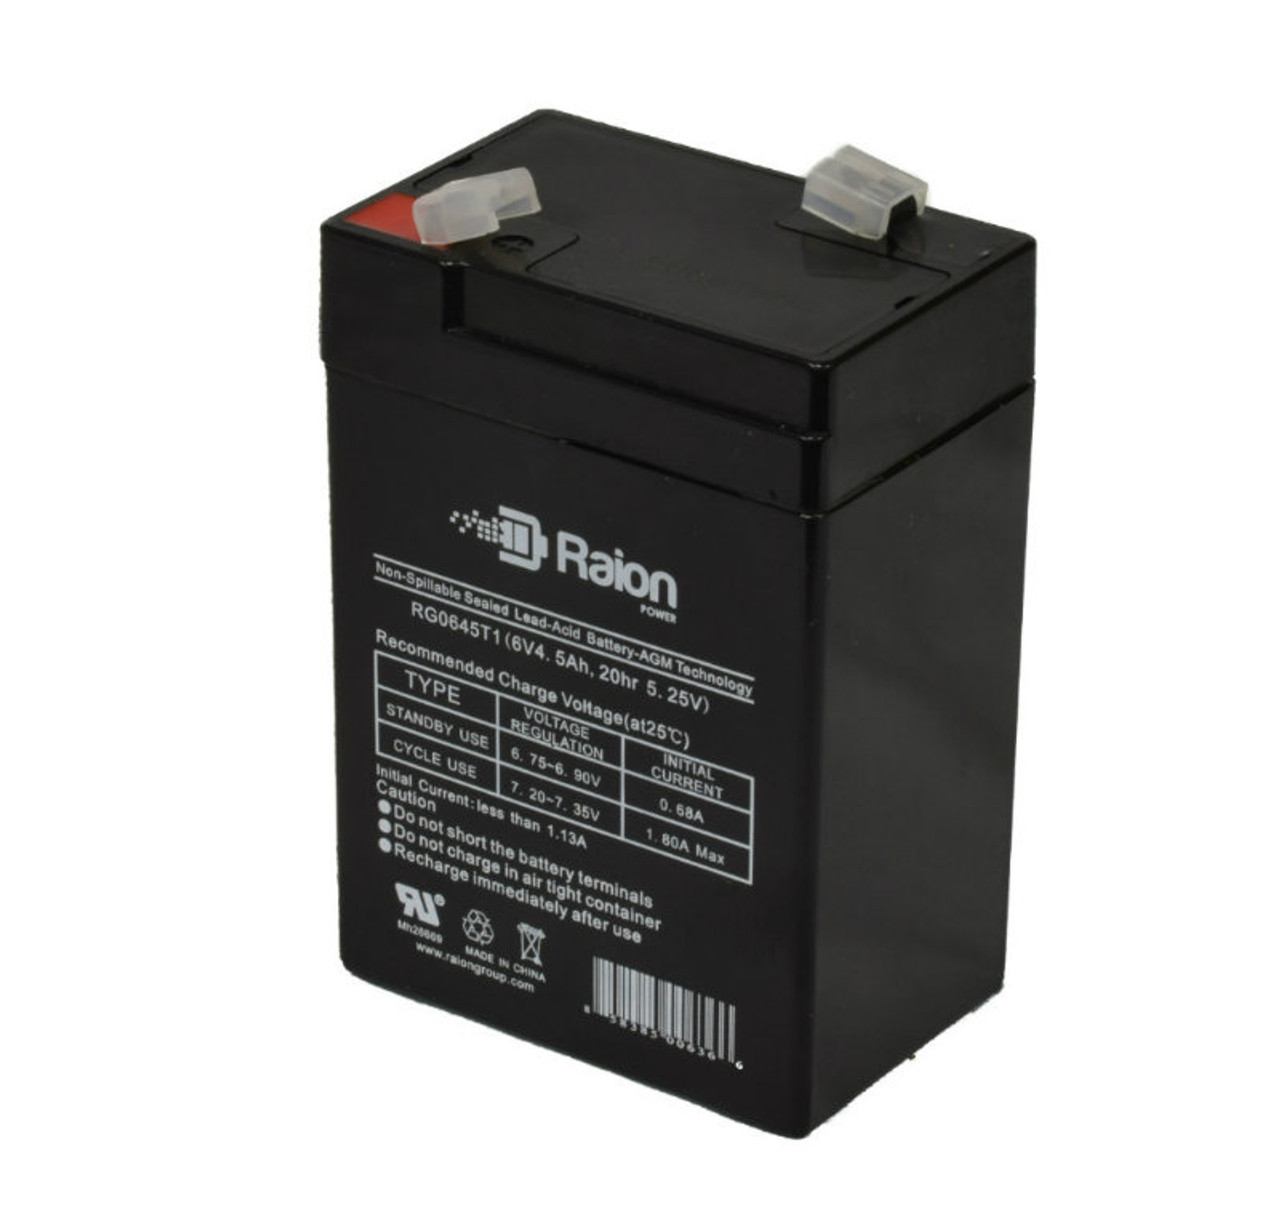 Raion Power RG0645T1 6V 4.5Ah Replacement Battery Cartridge for MHB MS4.5-6